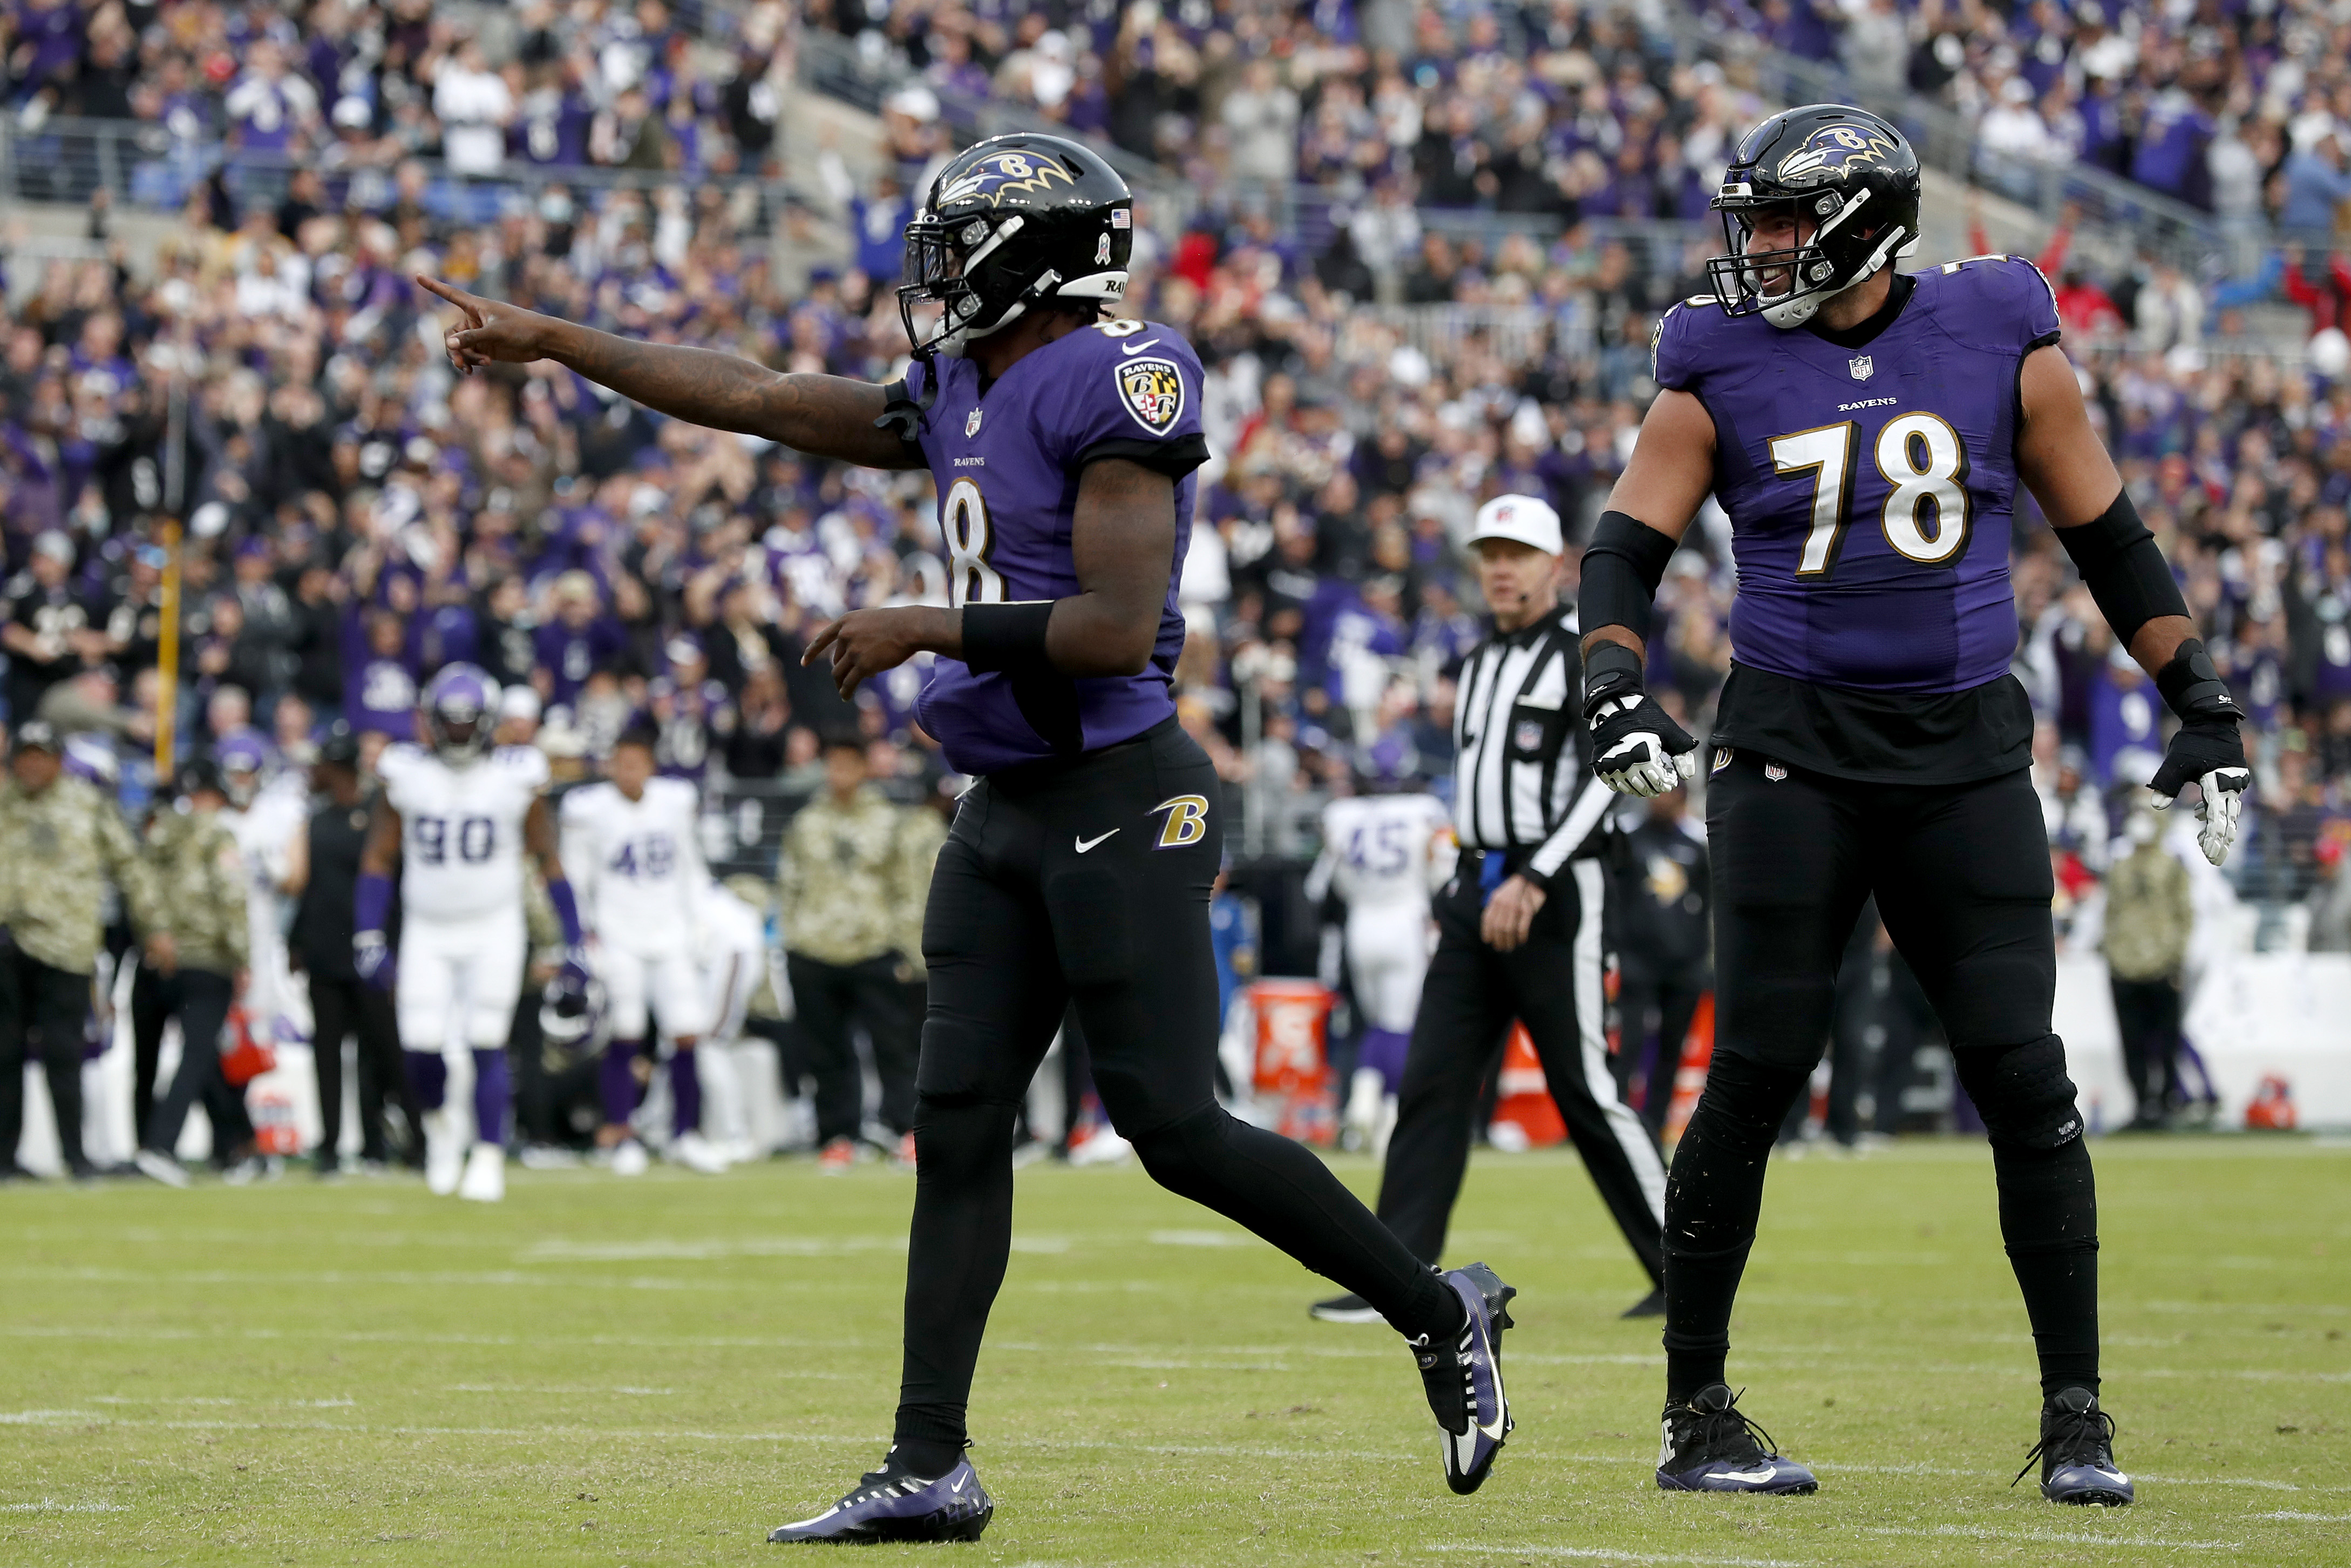 Lamar Jackson #8 of the Baltimore Ravens reacts after a fourth quarter touchdown against the Minnesota Vikings at M&amp;T Bank Stadium on November 07, 2021 in Baltimore, Maryland.